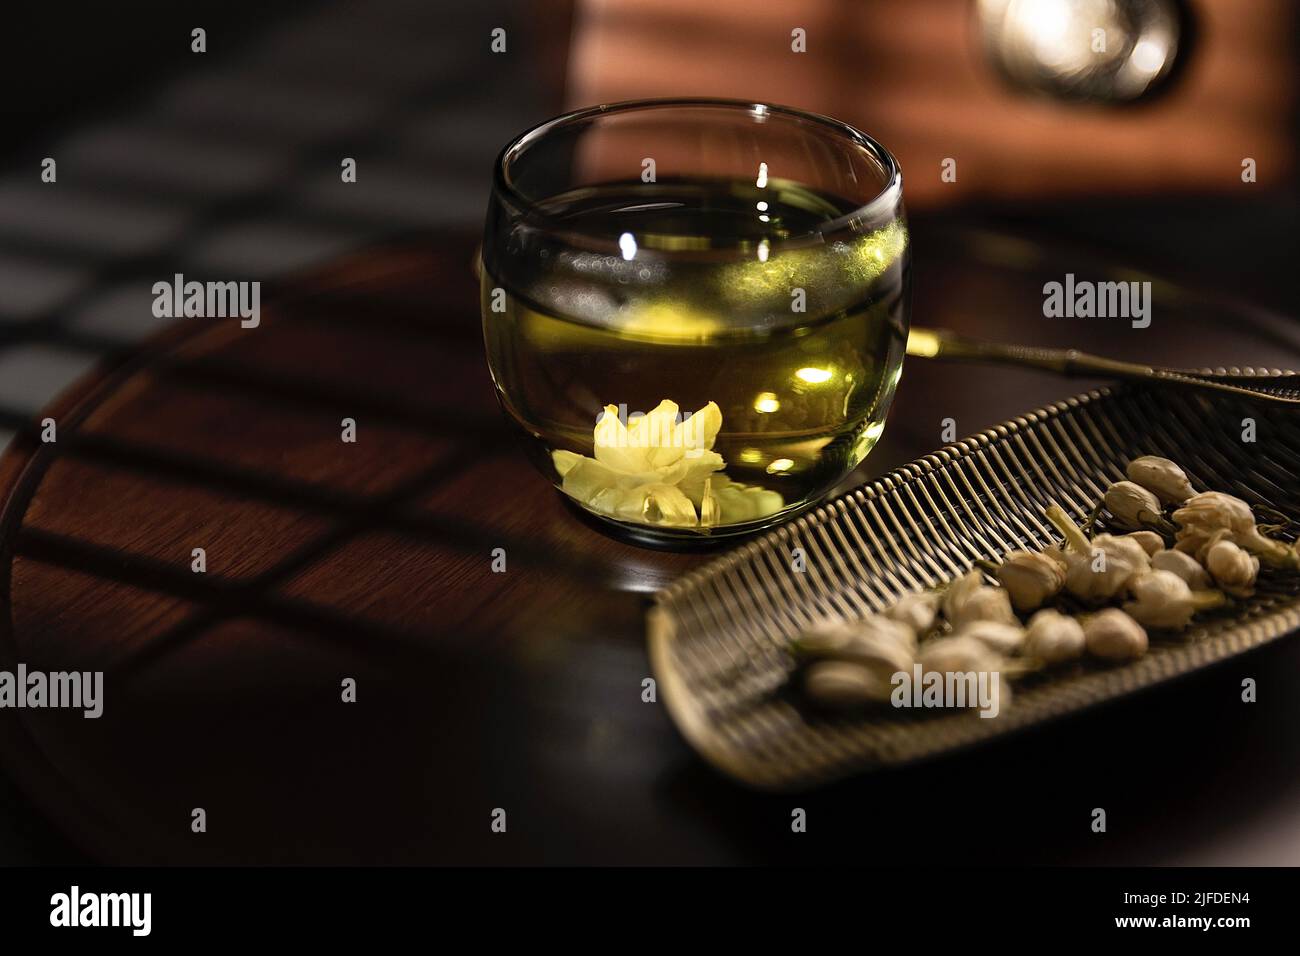 Steeped pure jasmine and dried tea, a traditional Chinese beverage - stock photo Stock Photo